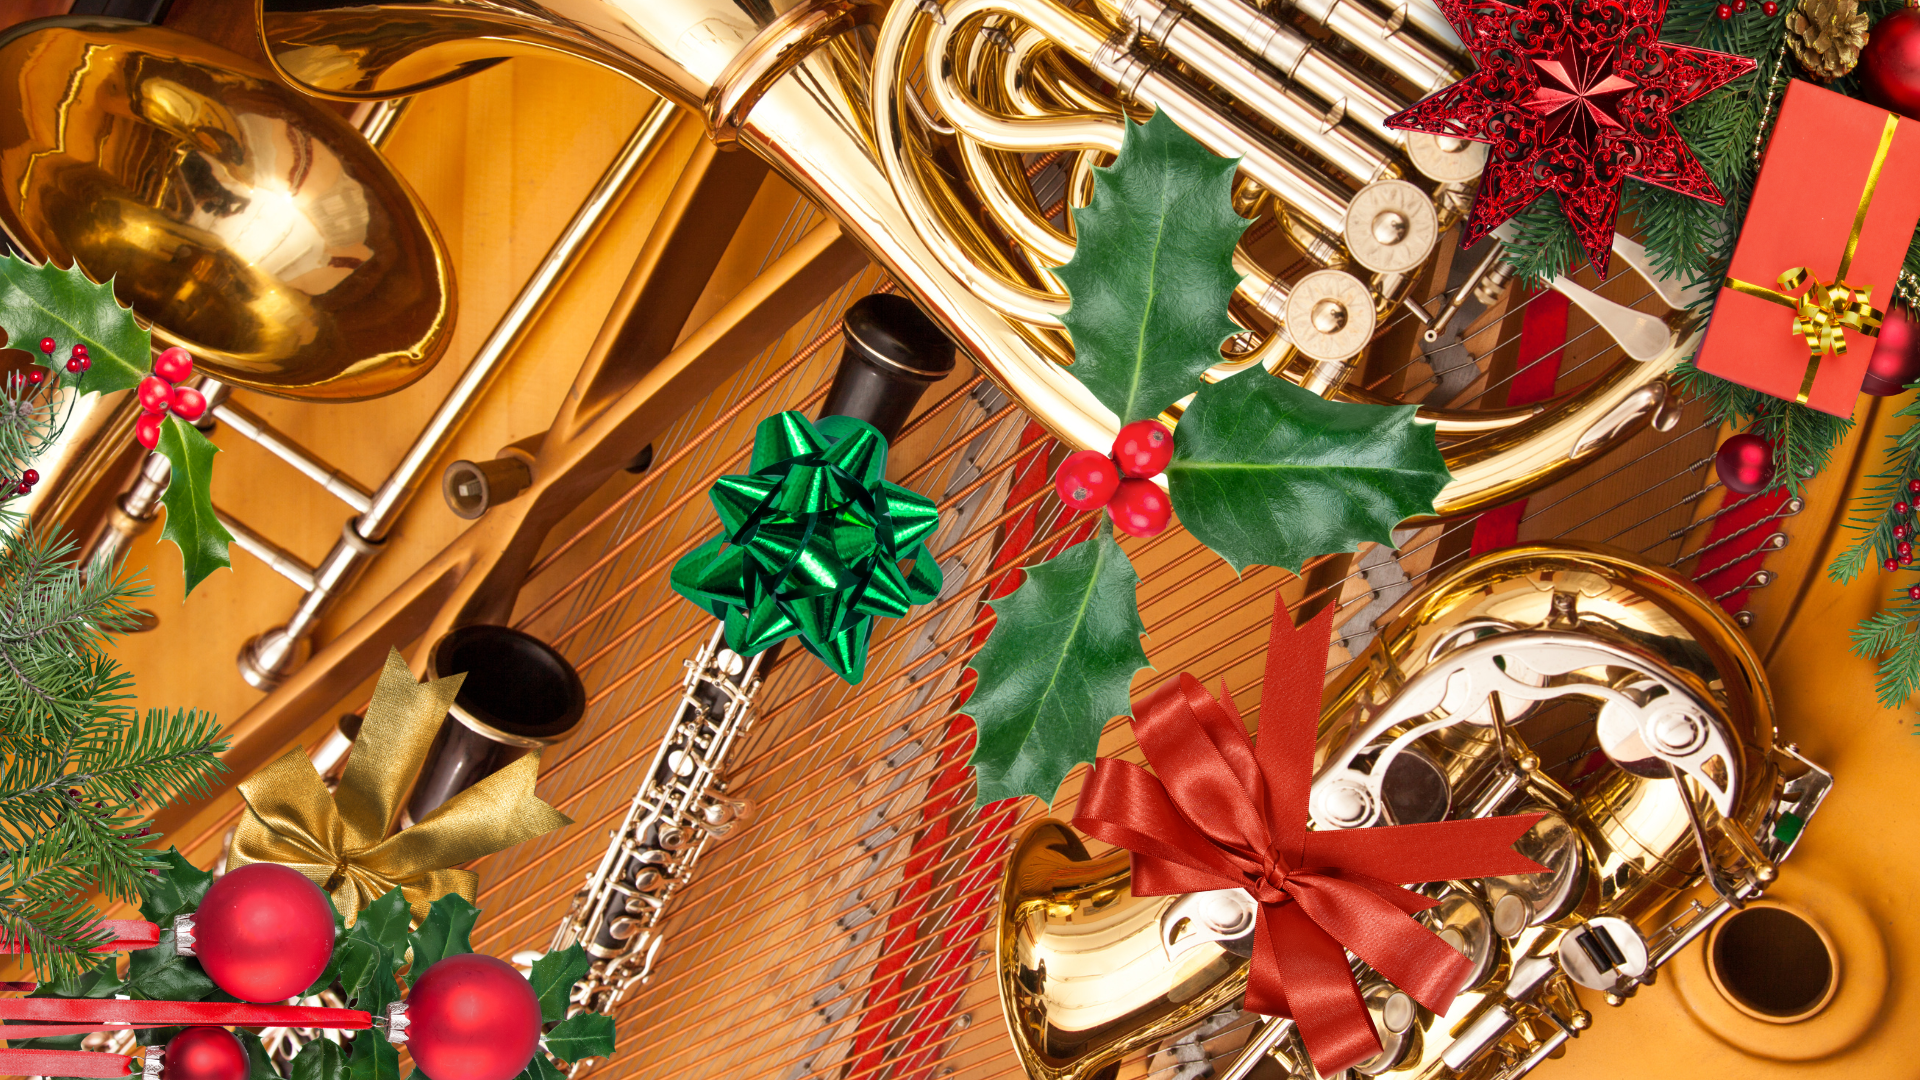 Brass instruments decorated for Christmas